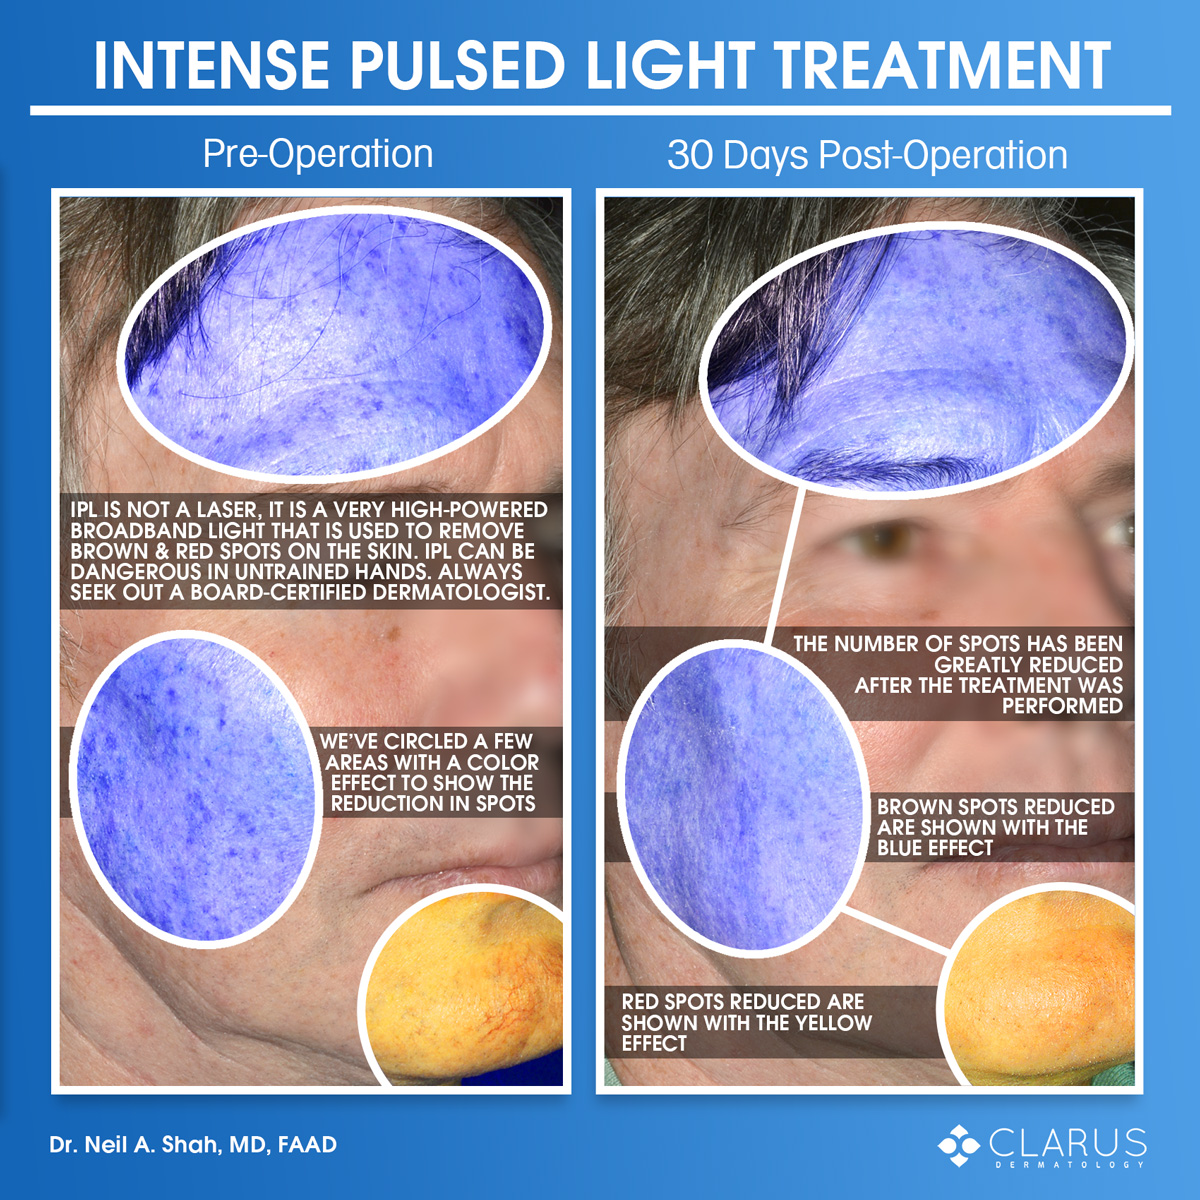 At Clarus Dermatology, we see a lot of patients for IPL treatment to reduce the number of brown and red spots on their skin. Contrary to what you might think, the L in IPL does not stand for laser but rather light. IPL is short for Intense Pulsed Light; the treatment involves a very high-powered broadband light - imagine a really bright flashlamp. IPL is an incredibly powerful device that can burn the skin with relative ease, which means that it can be quite dangerous in untrained hands - for this reason it is one of the most litigated cosmetic procedures. We always recommend seeing a board-certified dermatologist for your skin care needs and IPL is absolutely no exception. For this patient, Dr. Neil Shah personally performed the entire procedure using two skilled passes of the light at a relatively high energy setting in a single treatment to achieve the results that you see in the images.